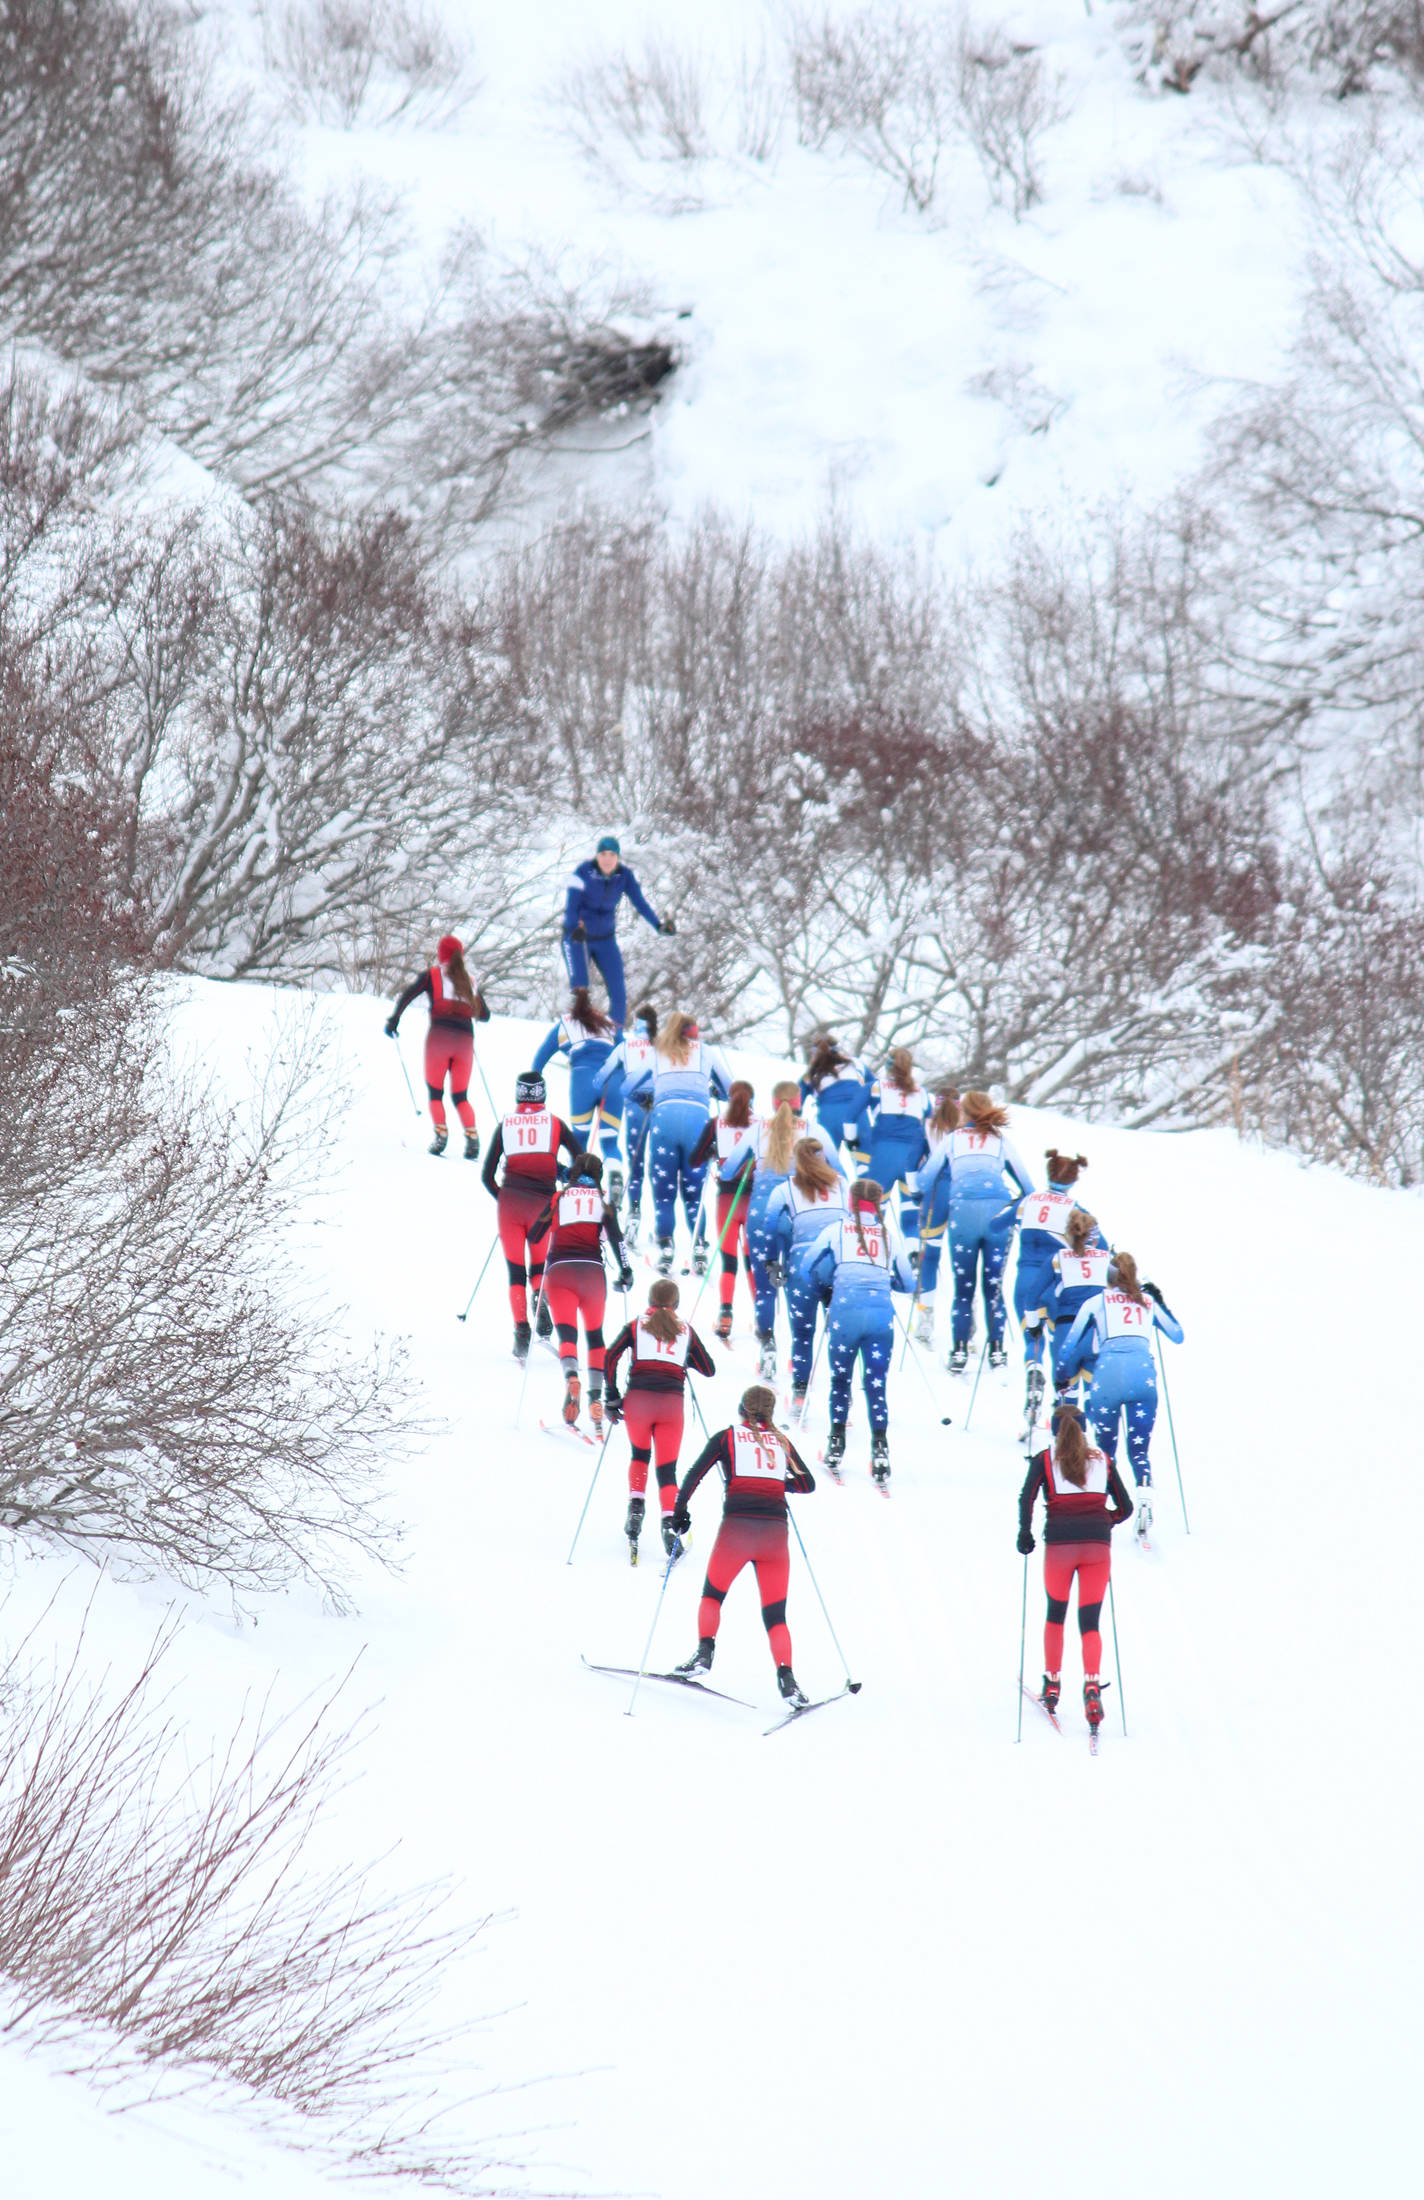 Varsity girl skiers from Homer, Soldotna and Kenai ski up a hill at the start of a classic style cross-country ski race Friday, Feb. 1, 2019 at the Lookout Mountain Trails near Homer, Alaska. (Photo by Megan Pacer/Homer News)